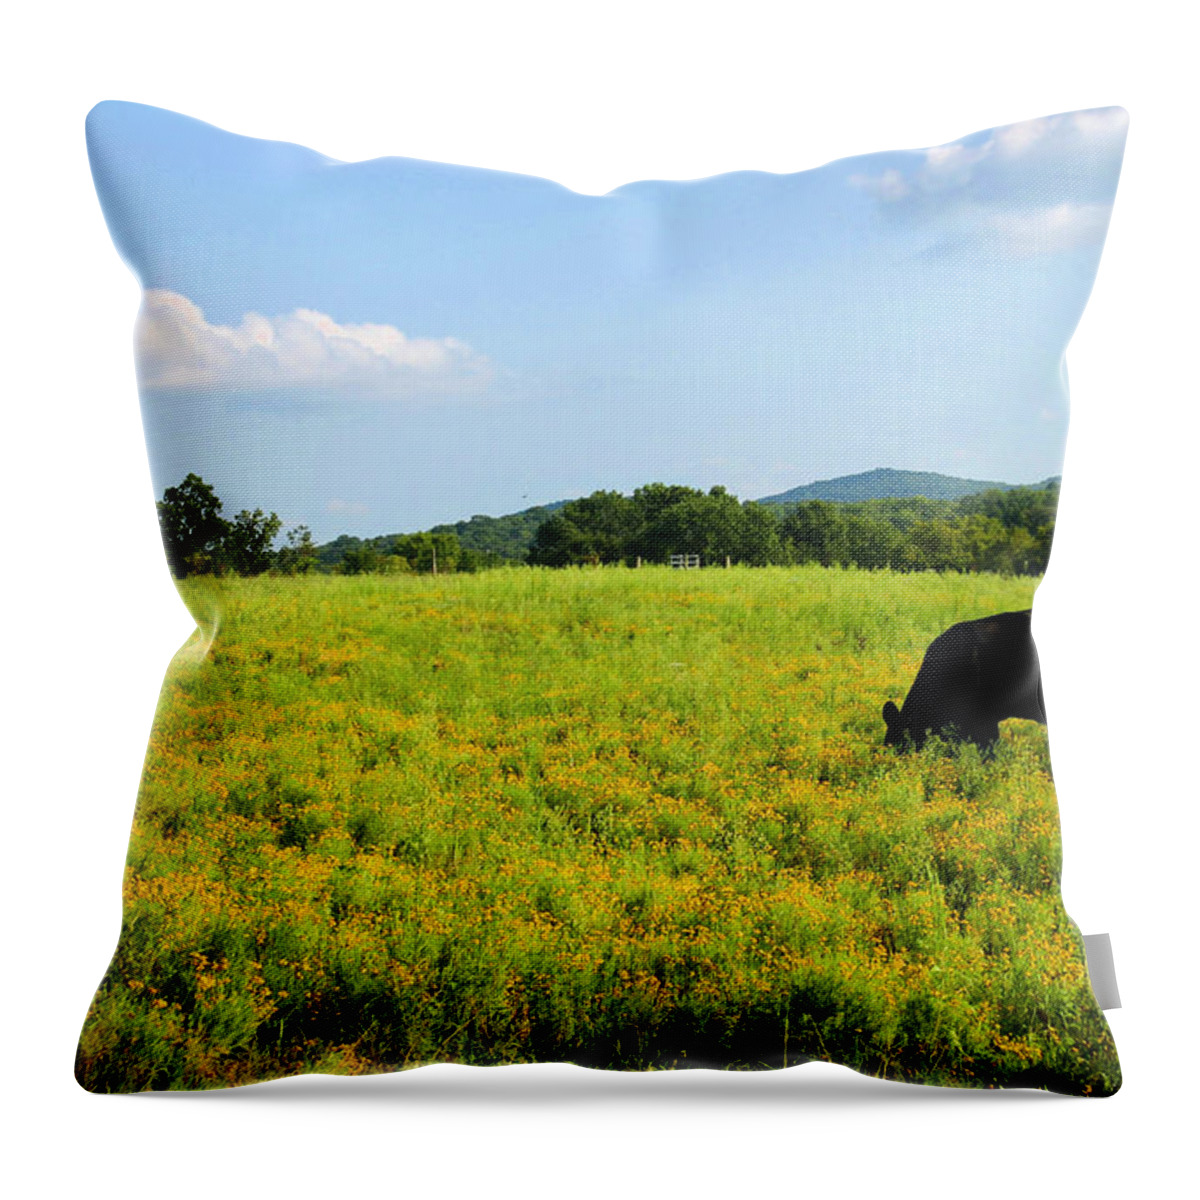 Cow Throw Pillow featuring the photograph Til the Cows Come Home by Kristin Elmquist